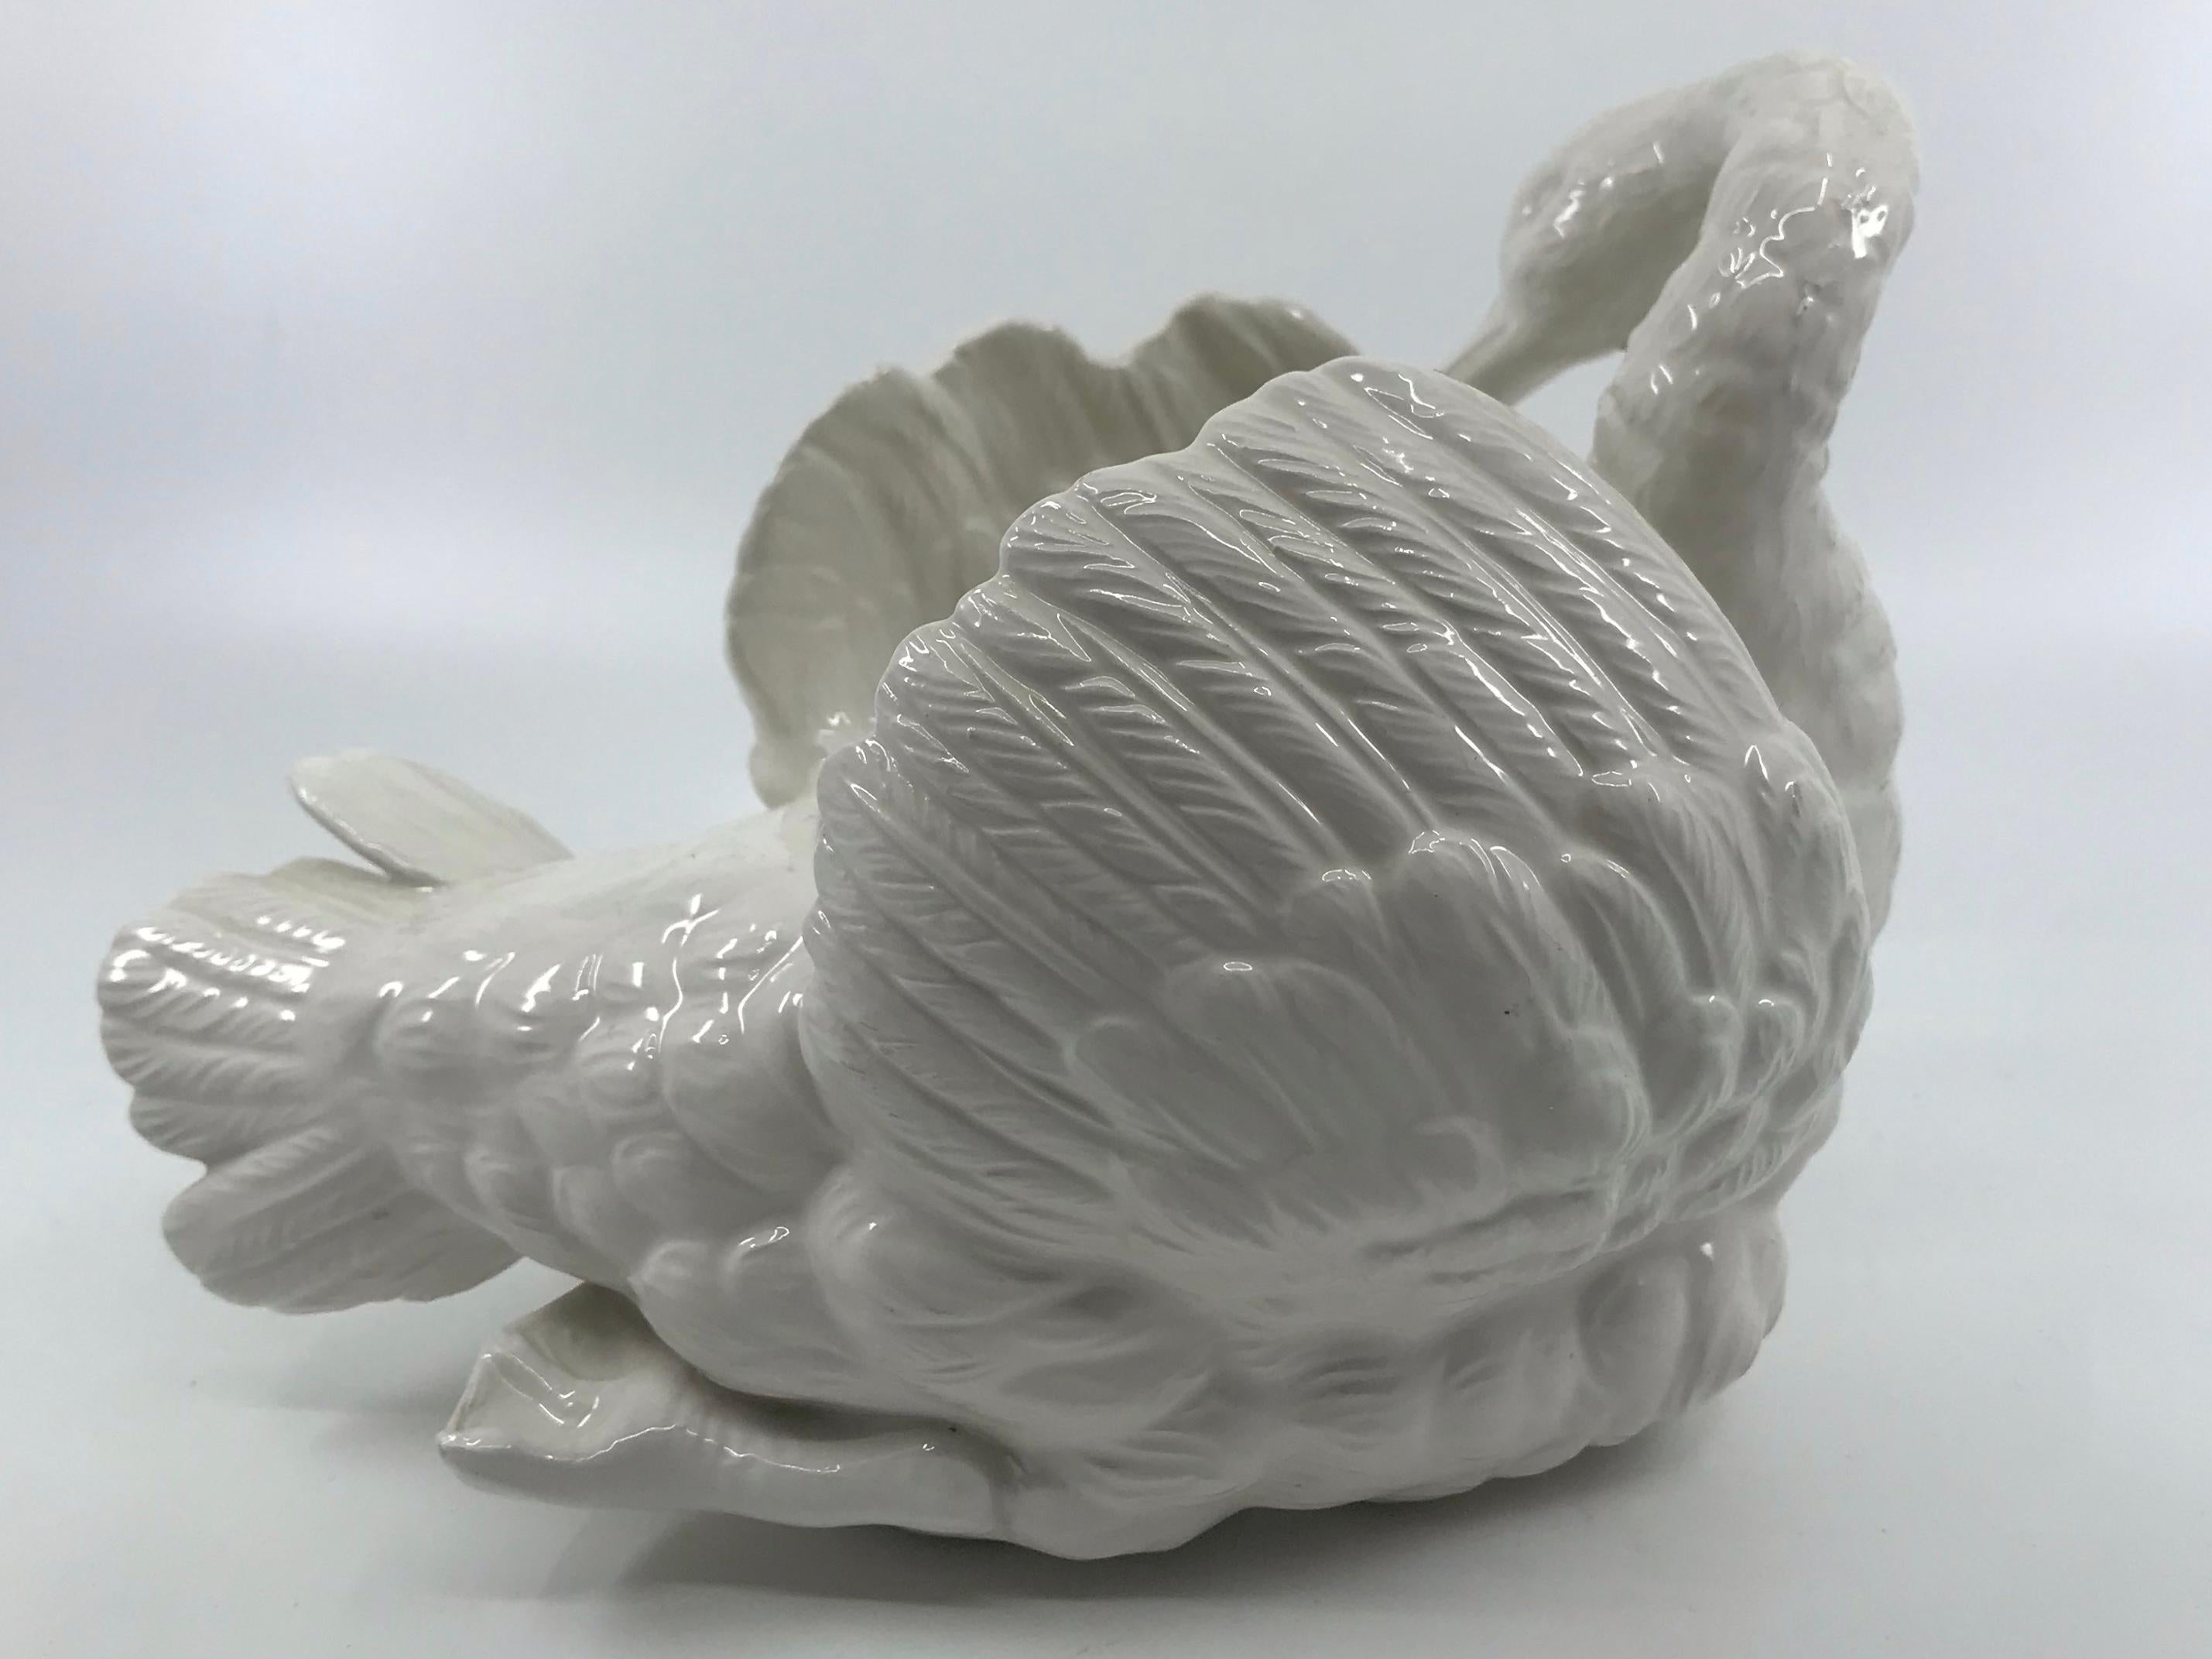 Italian swan cachepot sculpture. Lovely ceramic swan in the form of a small planter cachepot, beautifully rendered with stamp marks for Este. Italy, mid 20th century
Dimensions: 6.25” H x 8.75